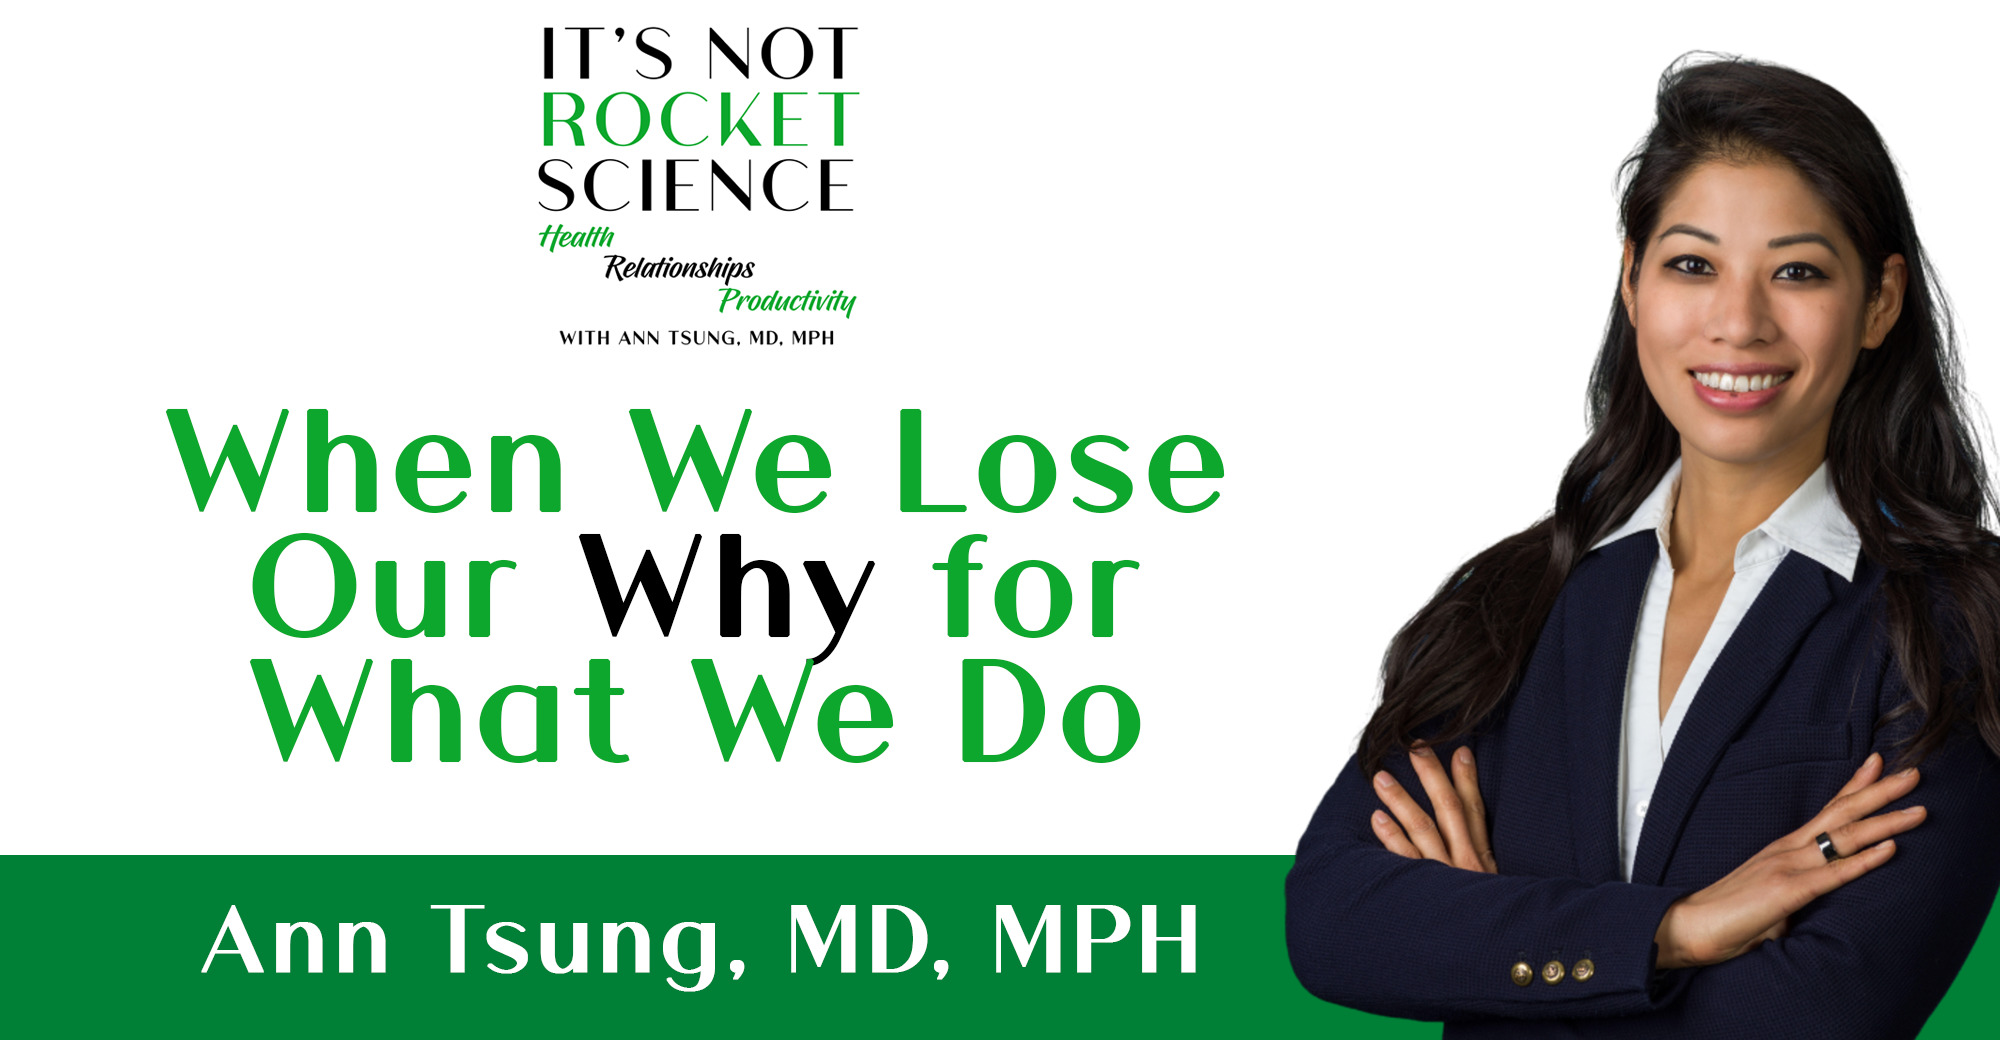 003 – When We Lose Our Why for What We Do